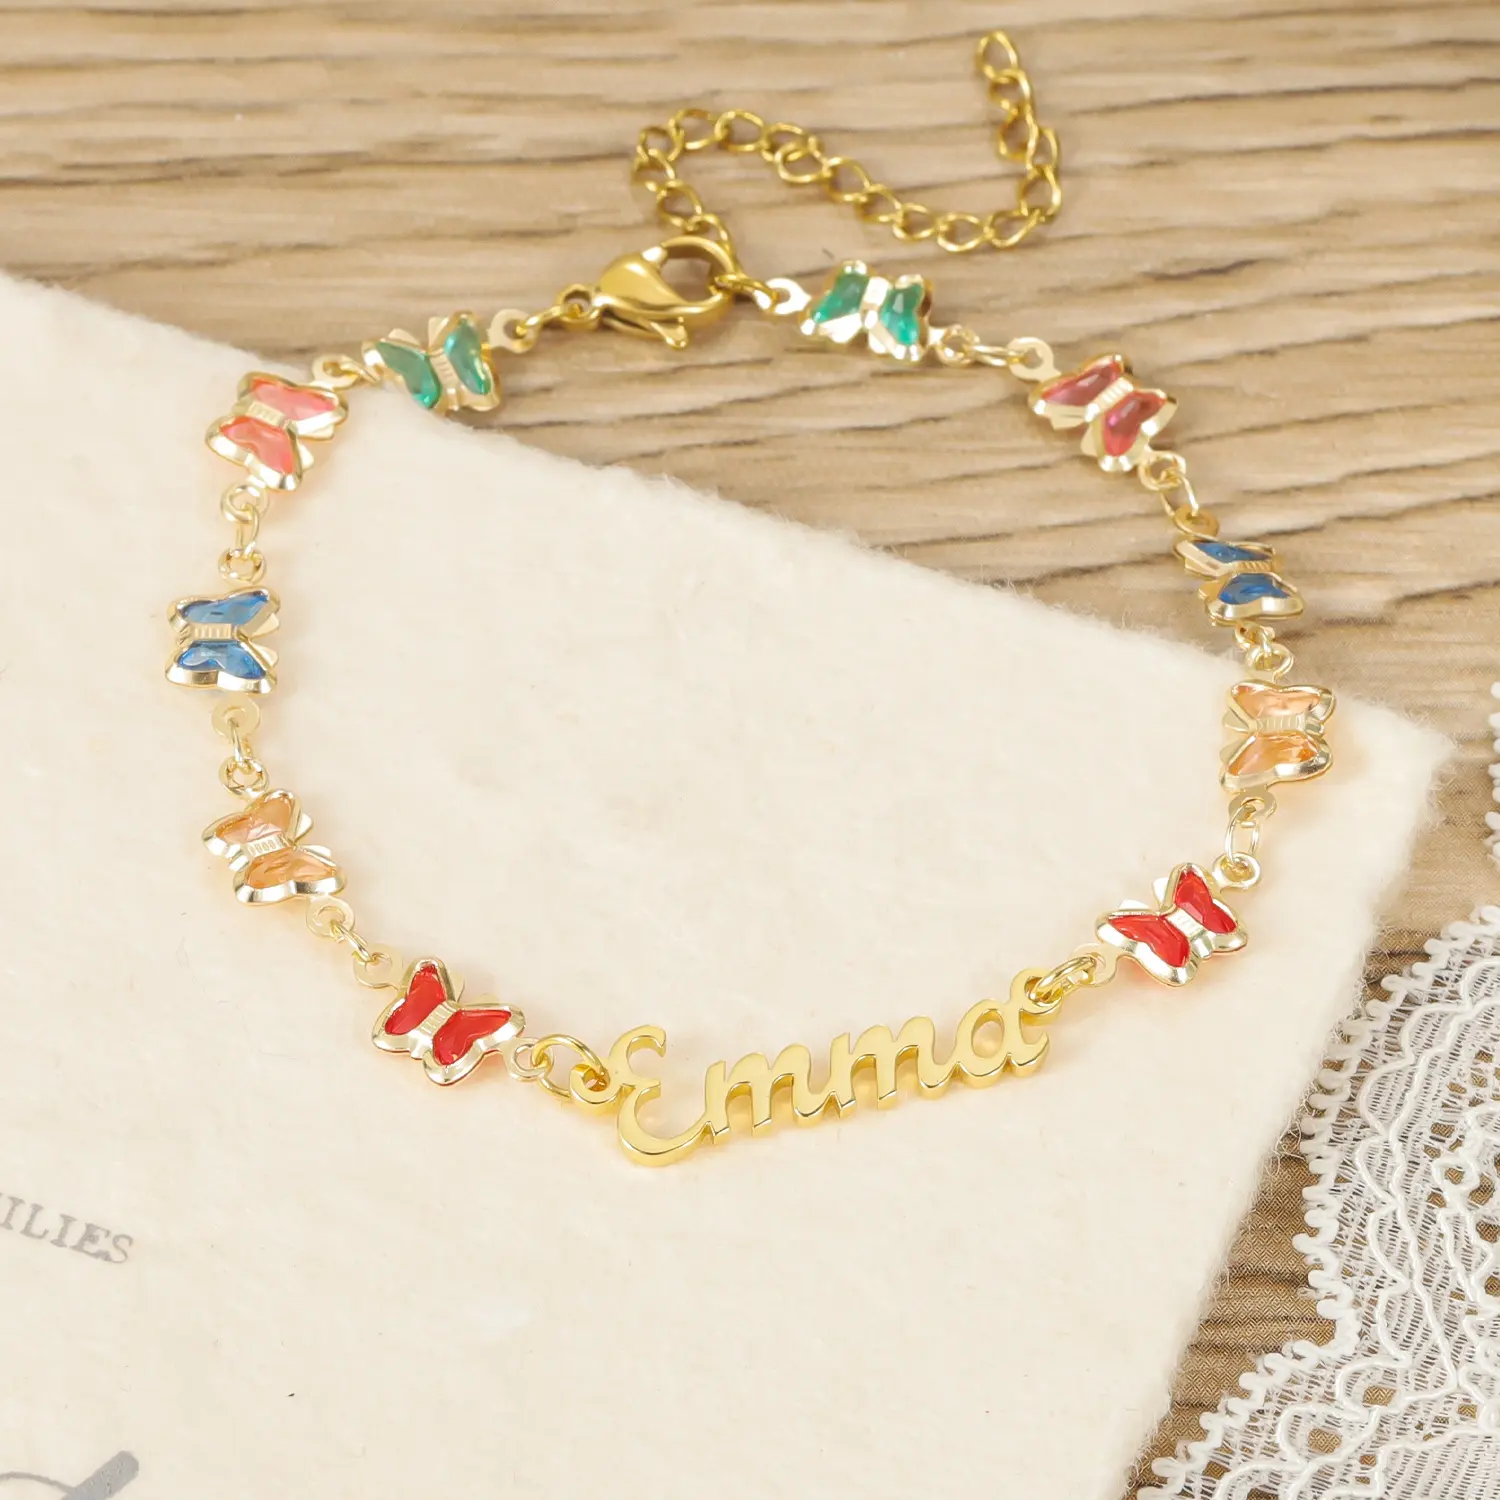 Custom Name Bracelet With Crystal Stone Butterfly Chain Jewelry For Women Fashion Jewelry Bracelets 18K Gold Plated